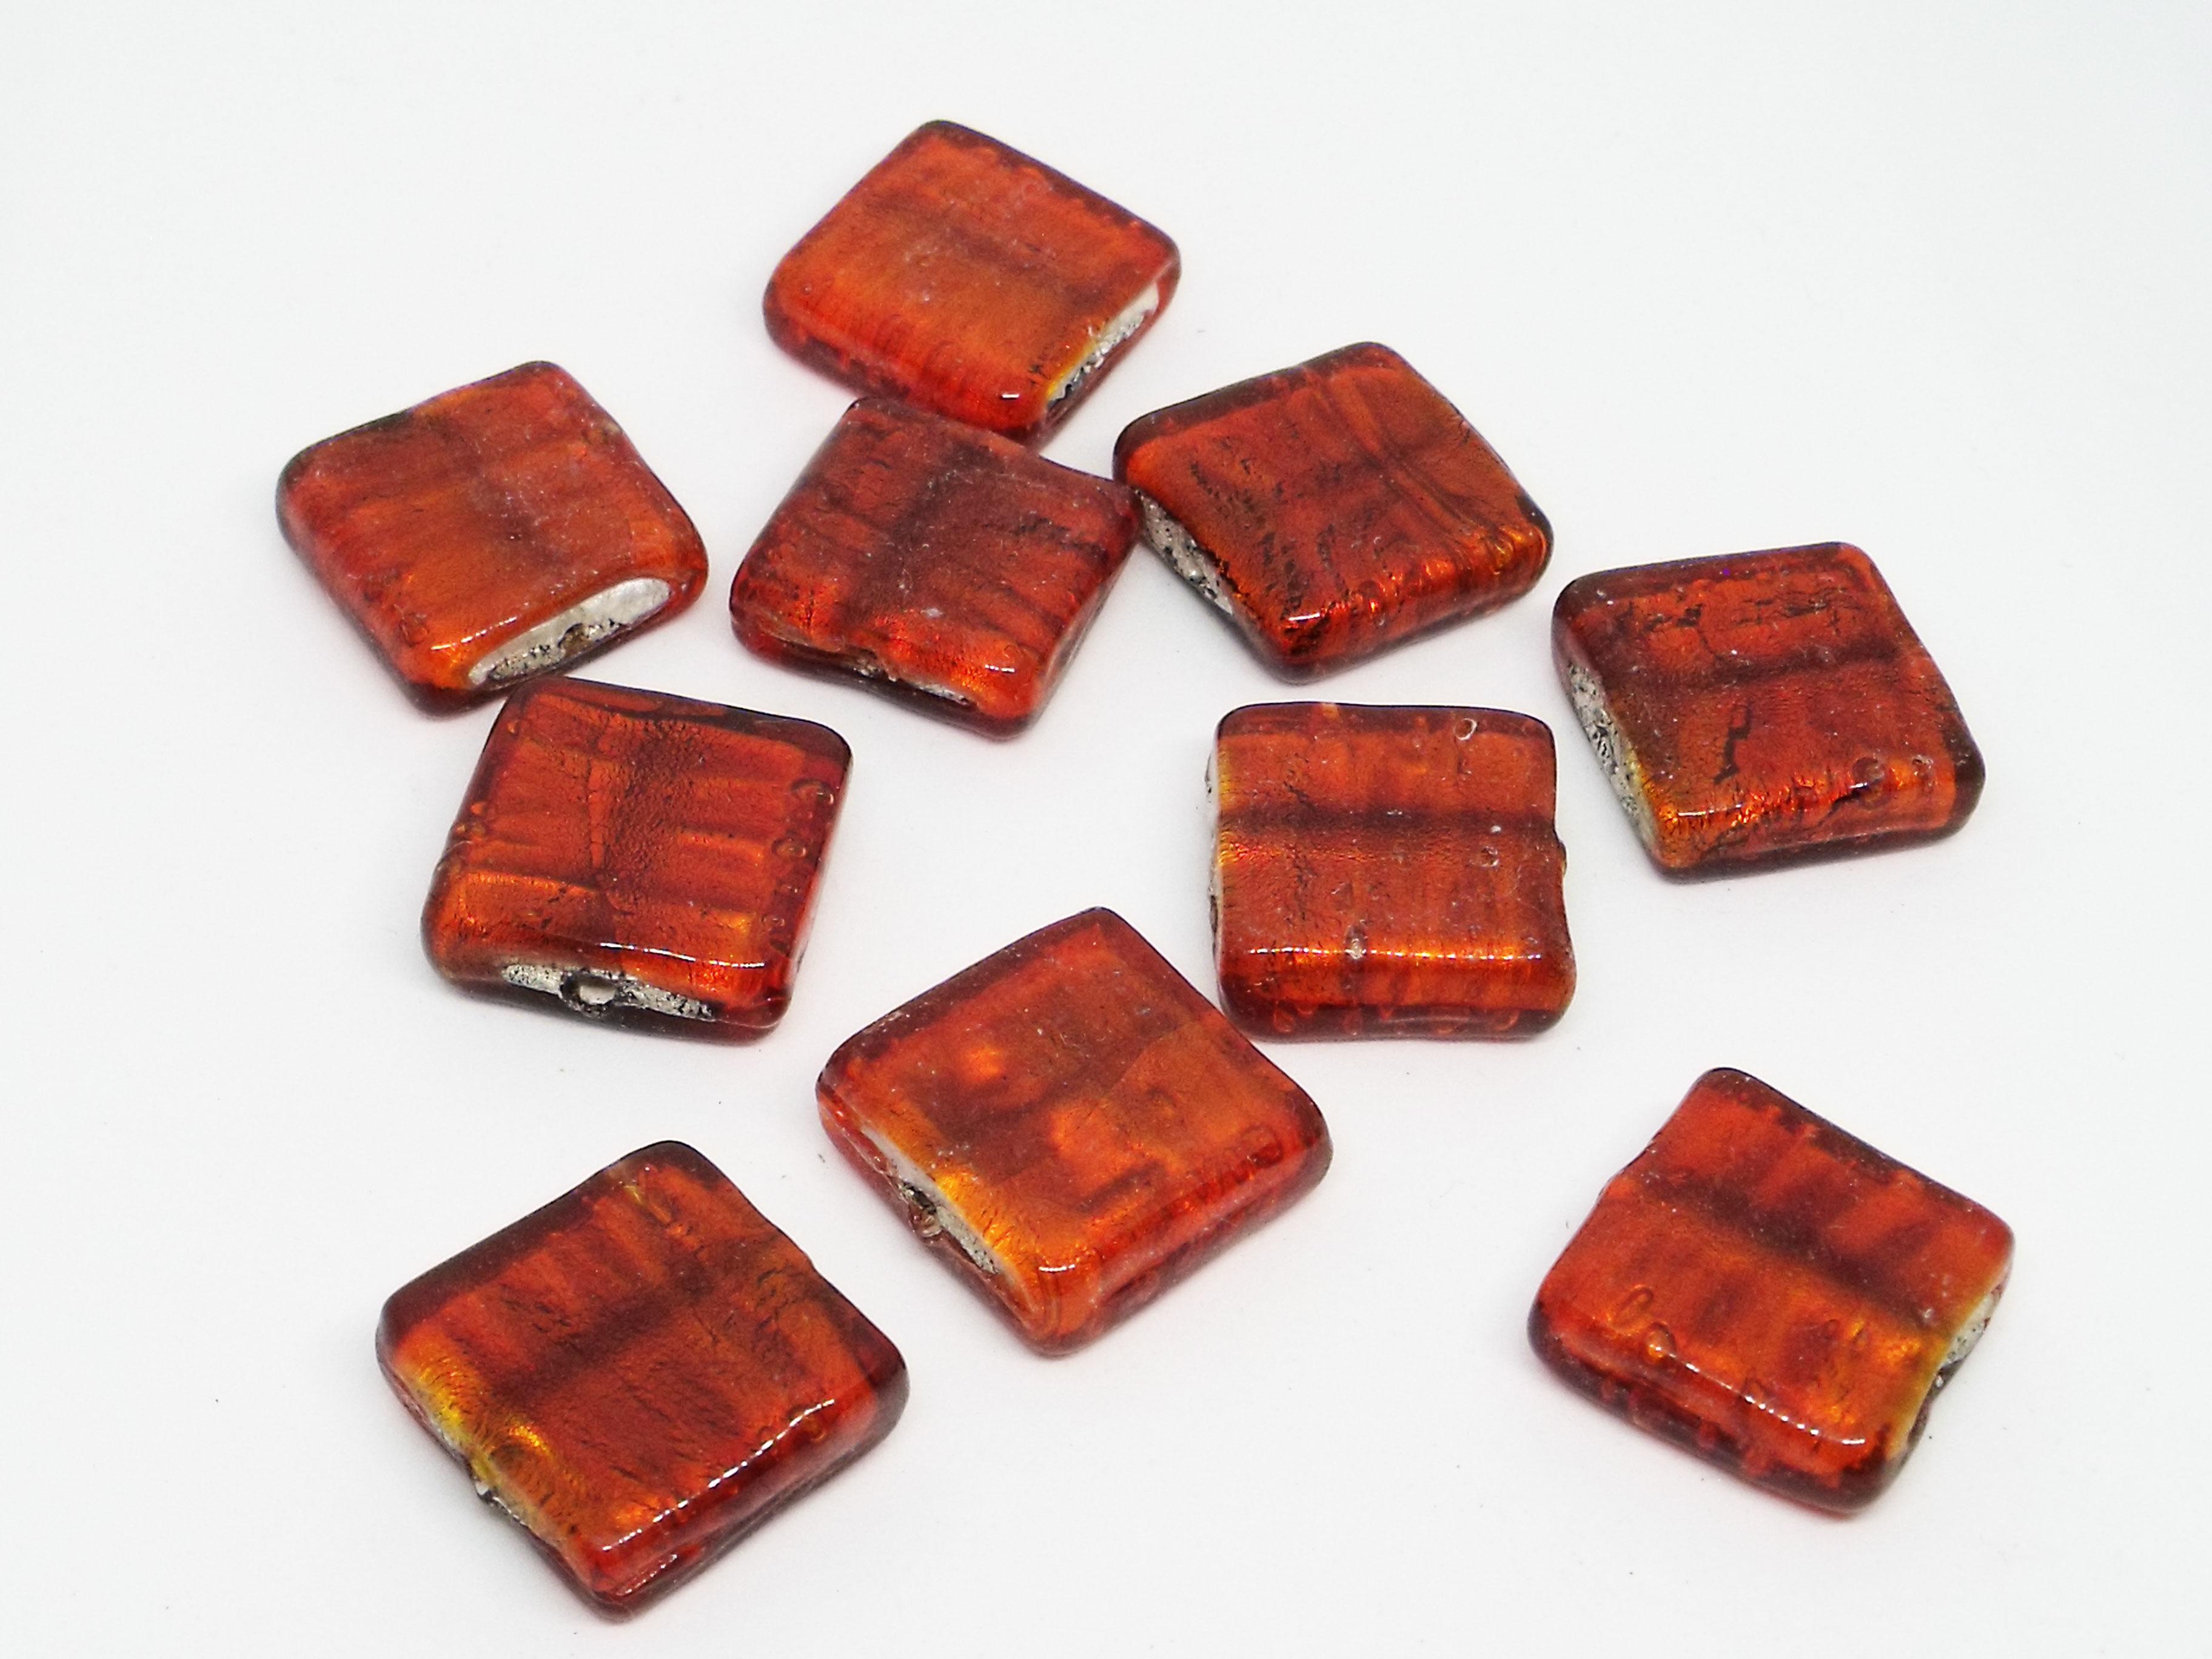 19mm Silver Foiled Square Glass Bead - Orange Red